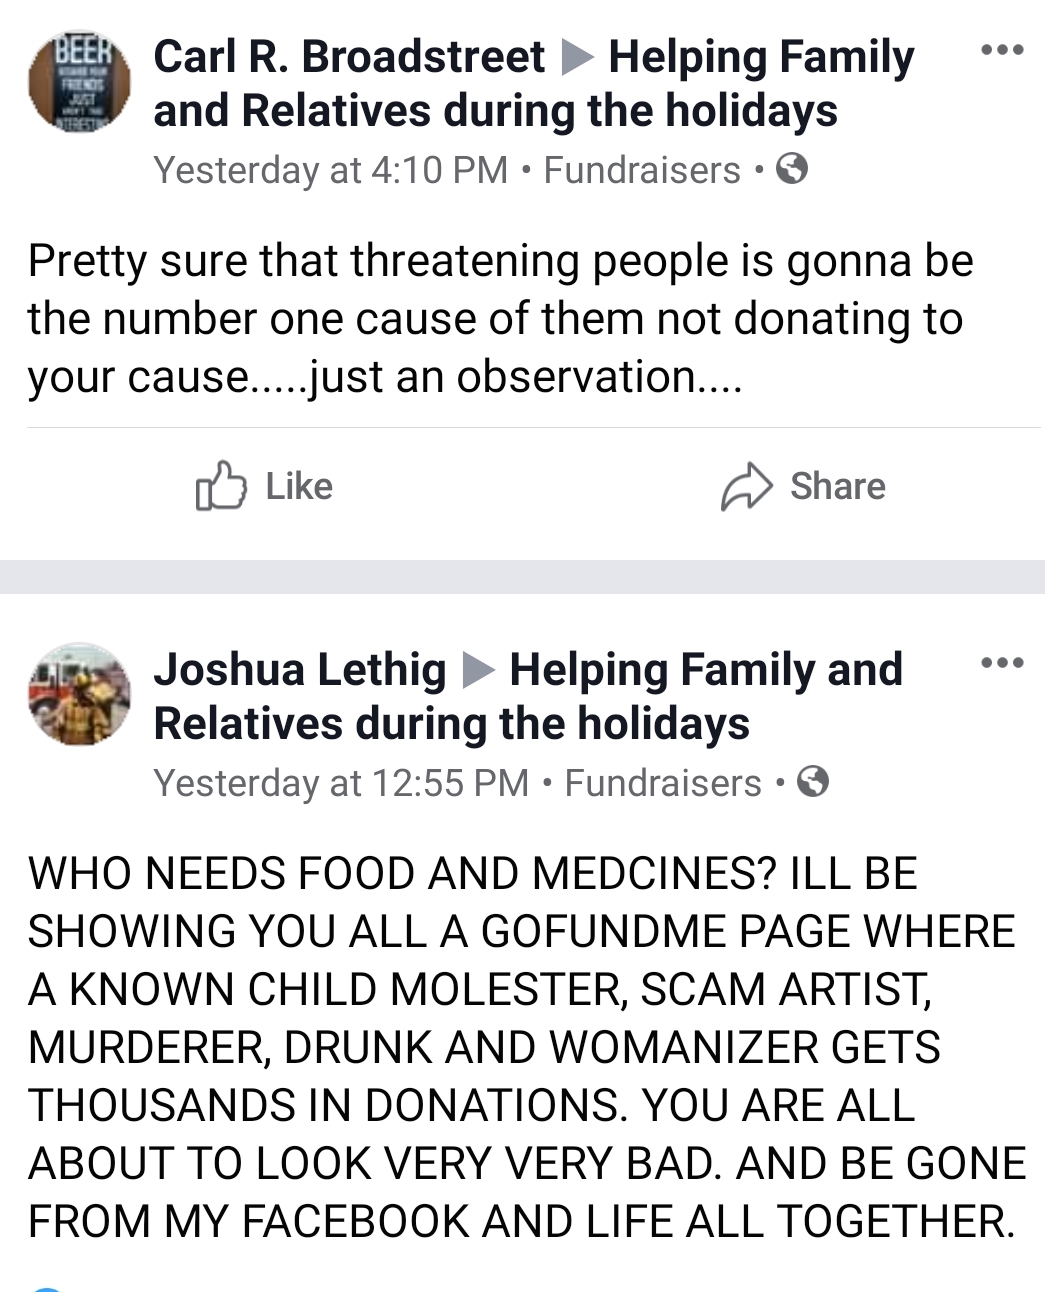 document - Beer Carl R. Broadstreet Helping Family and Relatives during the holidays Yesterday at . Fundraisers. Pretty sure that threatening people is gonna be the number one cause of them not donating to your cause.....just an observation.... Joshua Let